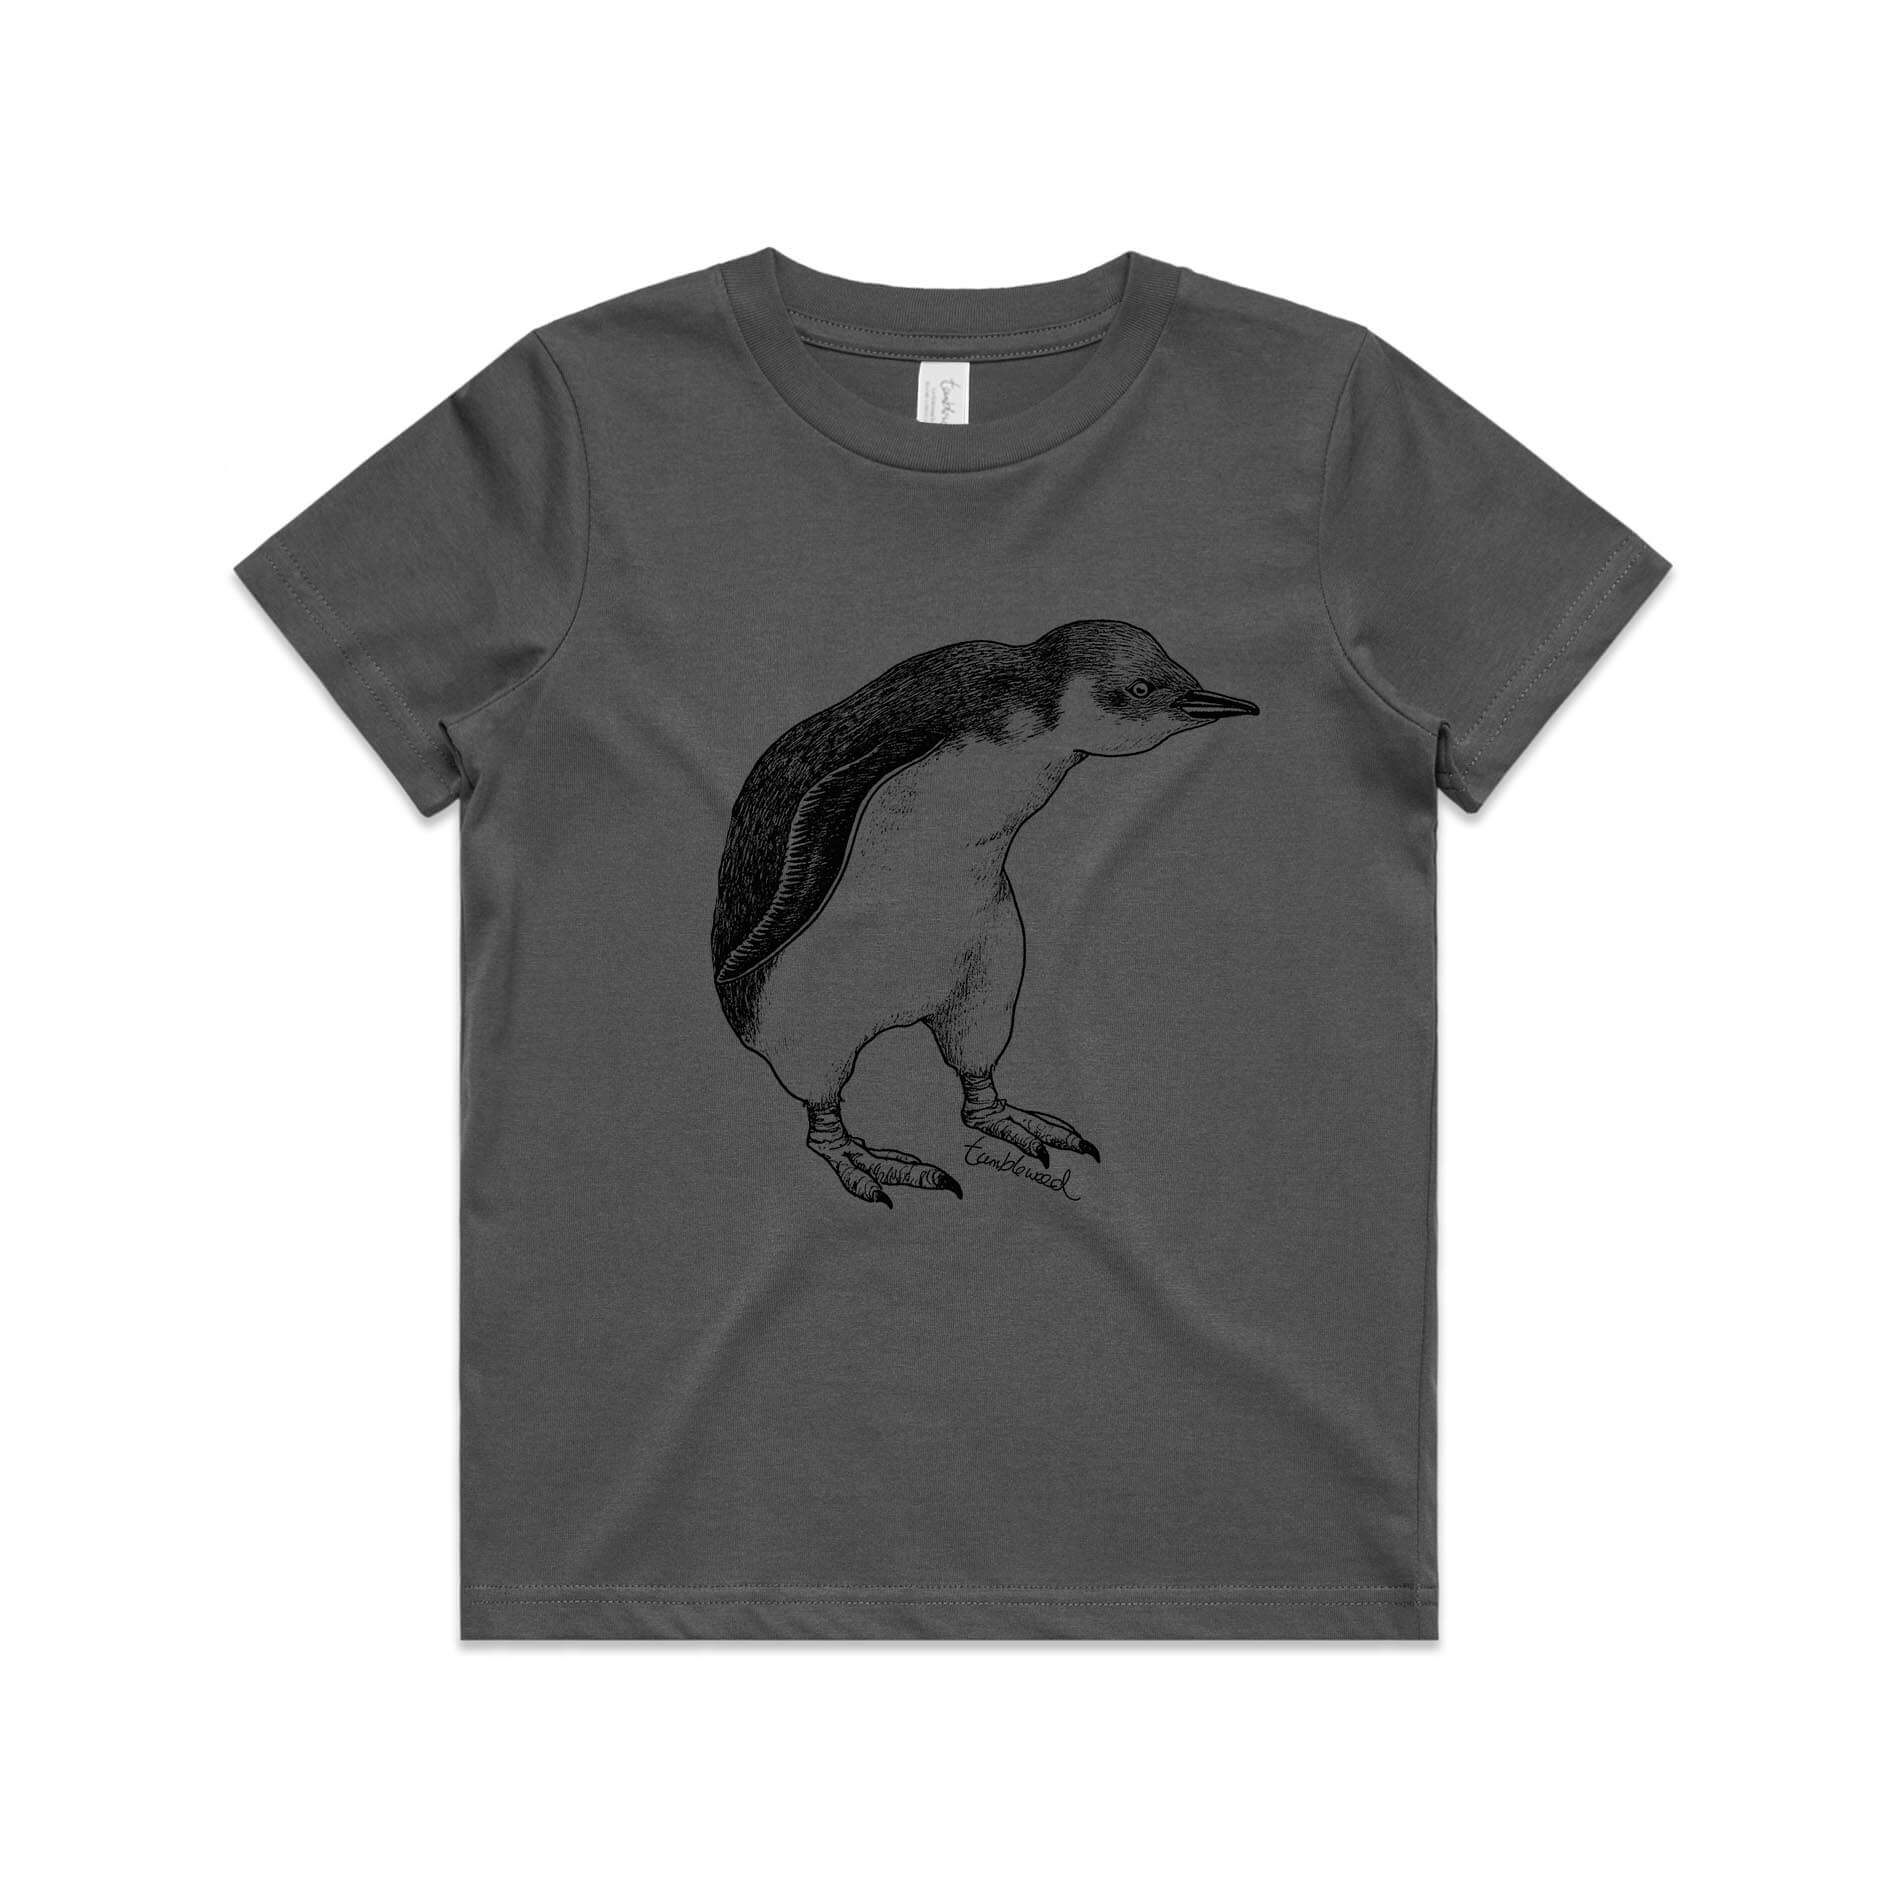 Charcoal, cotton kids' t-shirt with screen printed Kids little penguin design.